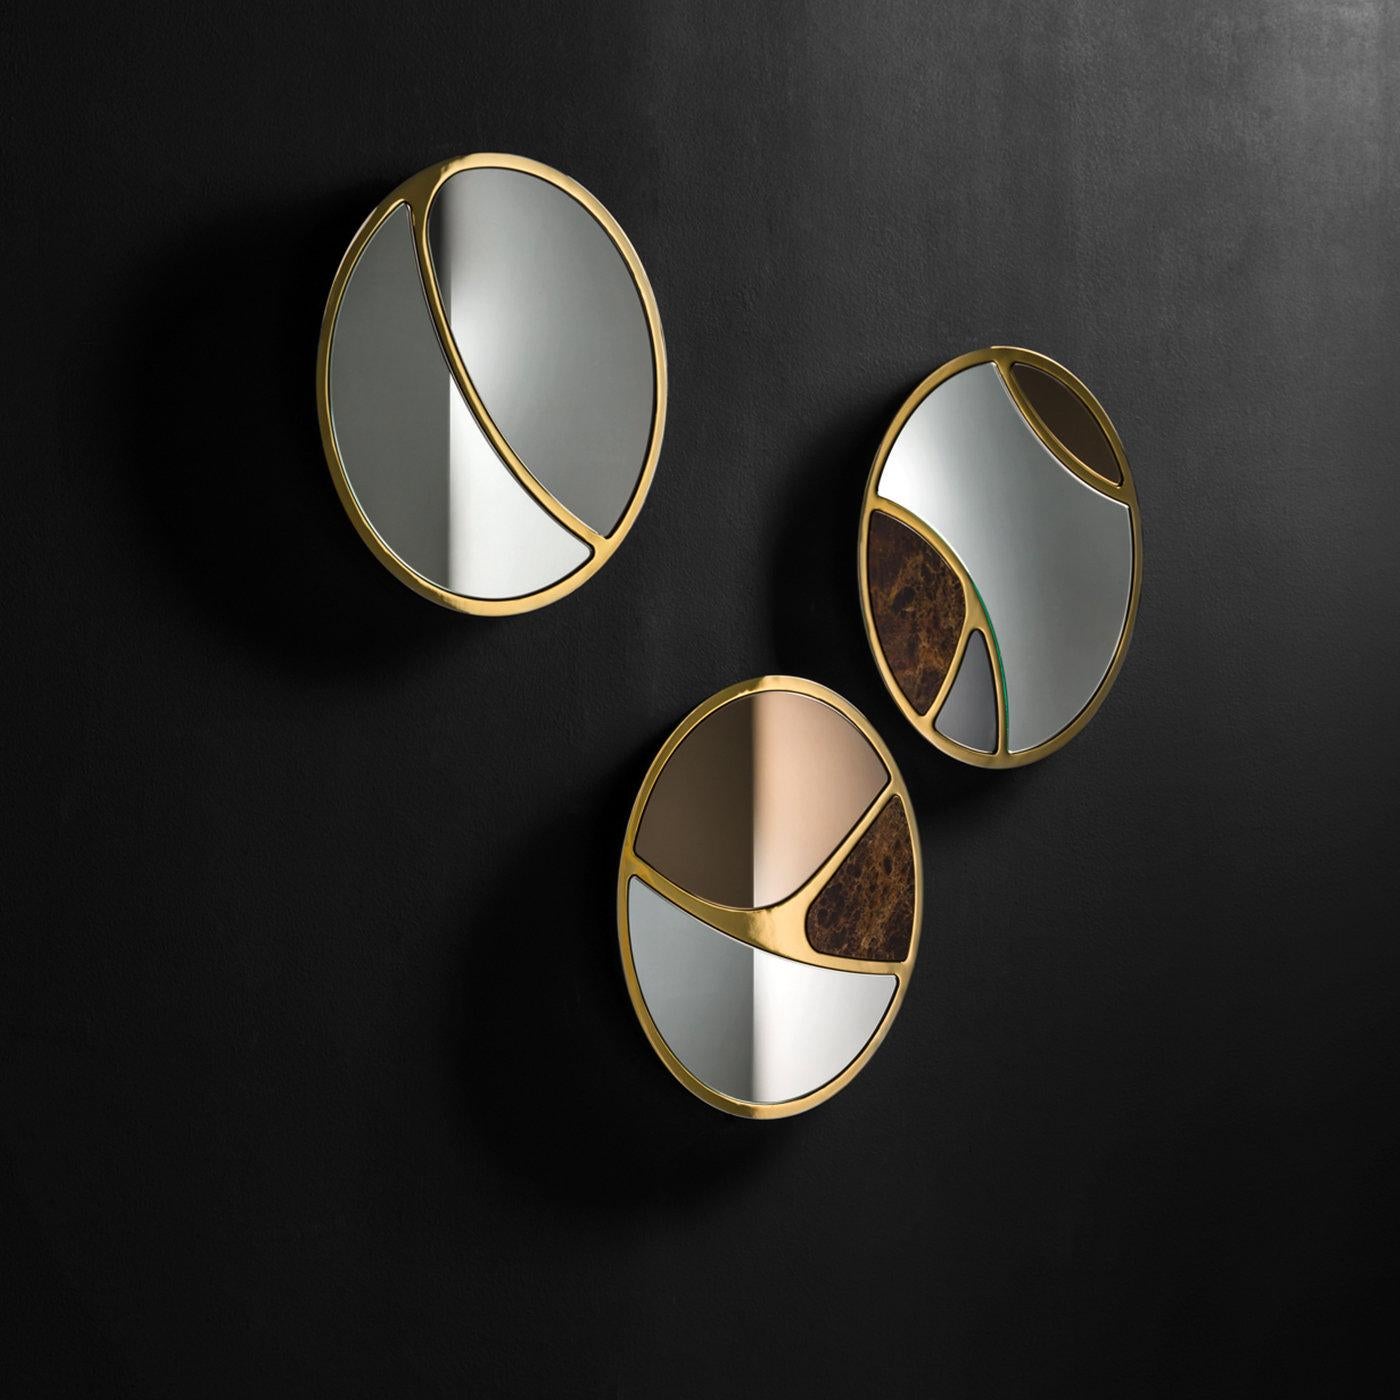 A combination of refined materials in a unique design, this mirror features three sections, elegantly divided by a laser-cut metal frame with a bronze finish: one of Emperador marble, one in smokey gray and the larger section in clear mirror. The